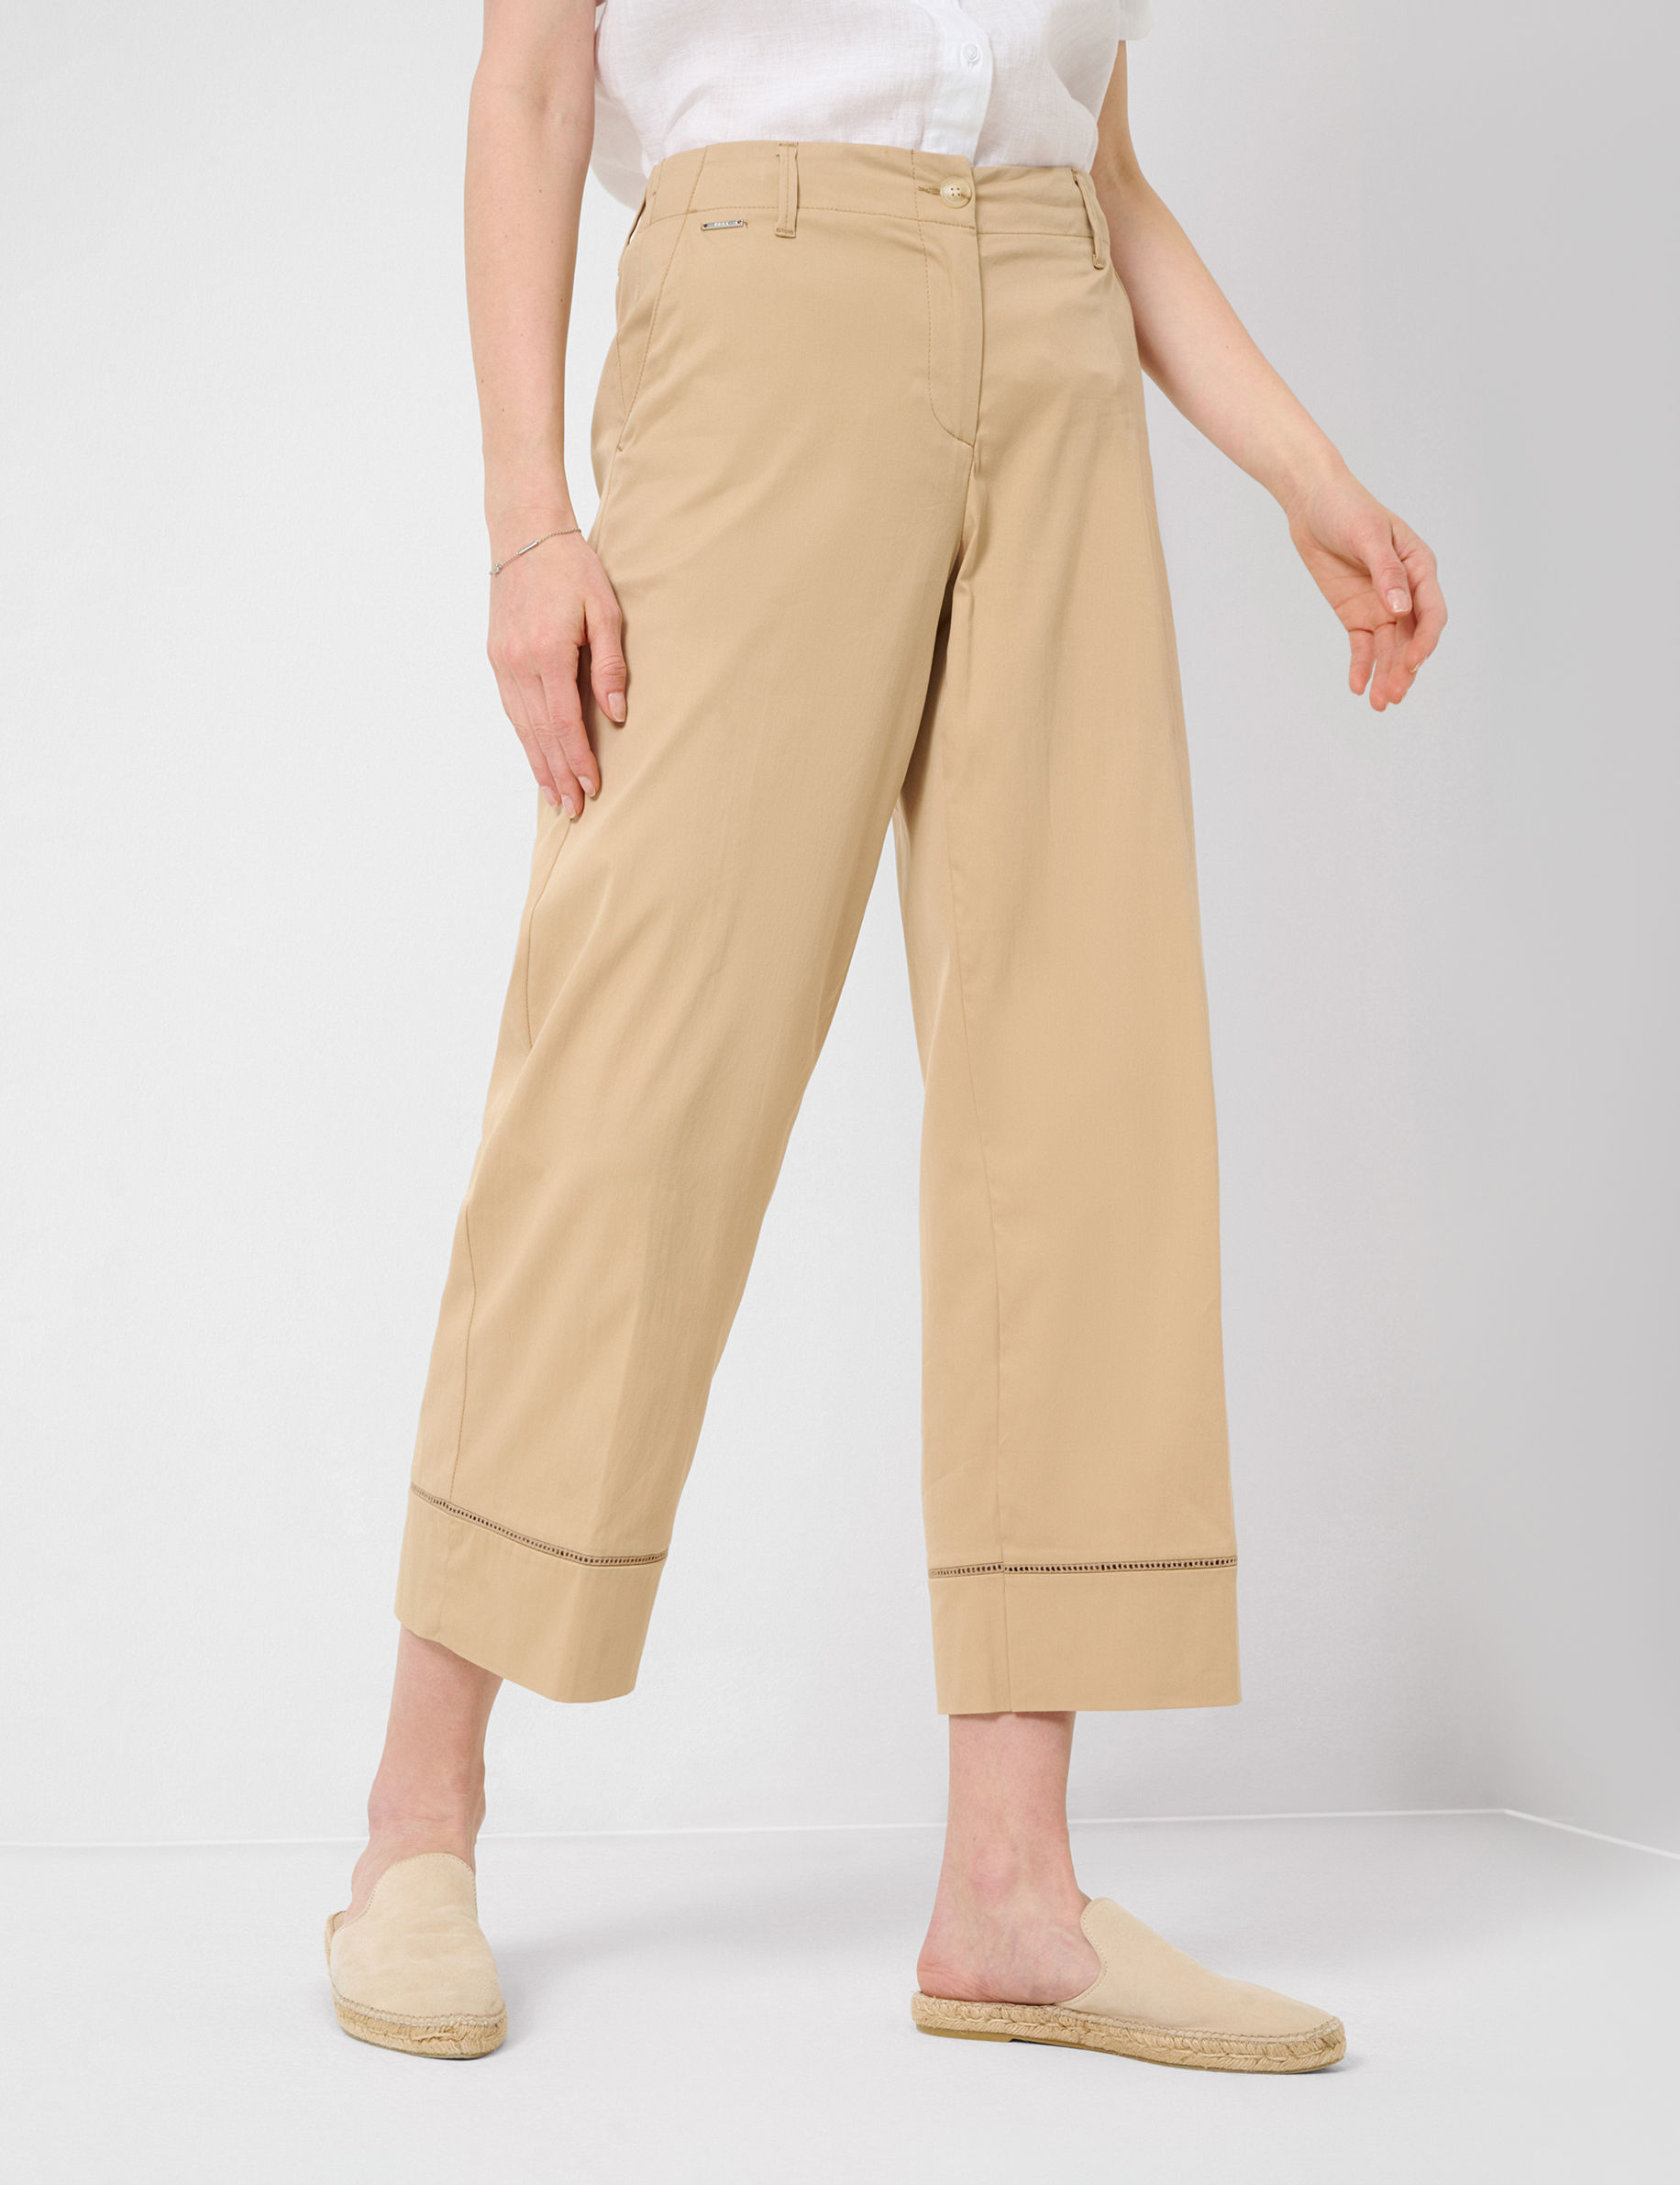 Shades of brown, Women, WIDE LEG, Style MAINE S, MODEL_FRONT_ISHOP